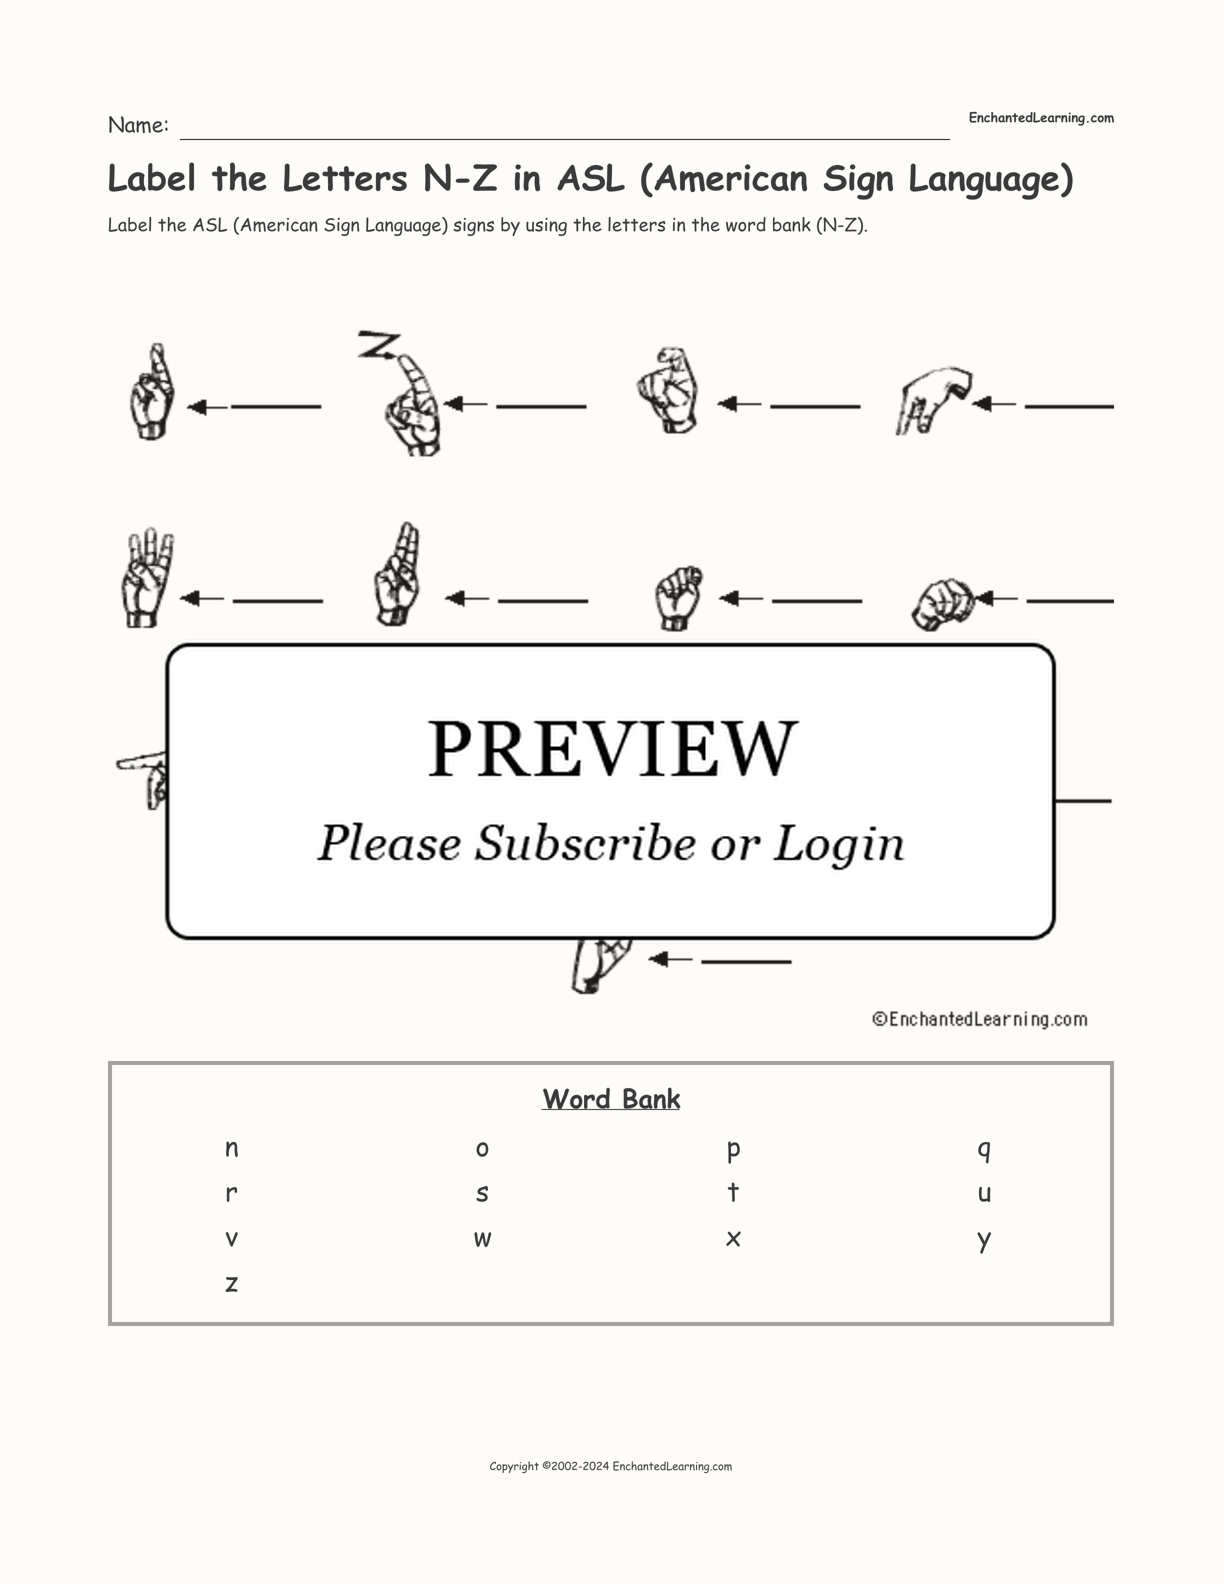 Label the Letters N-Z in ASL (American Sign Language) interactive worksheet page 1